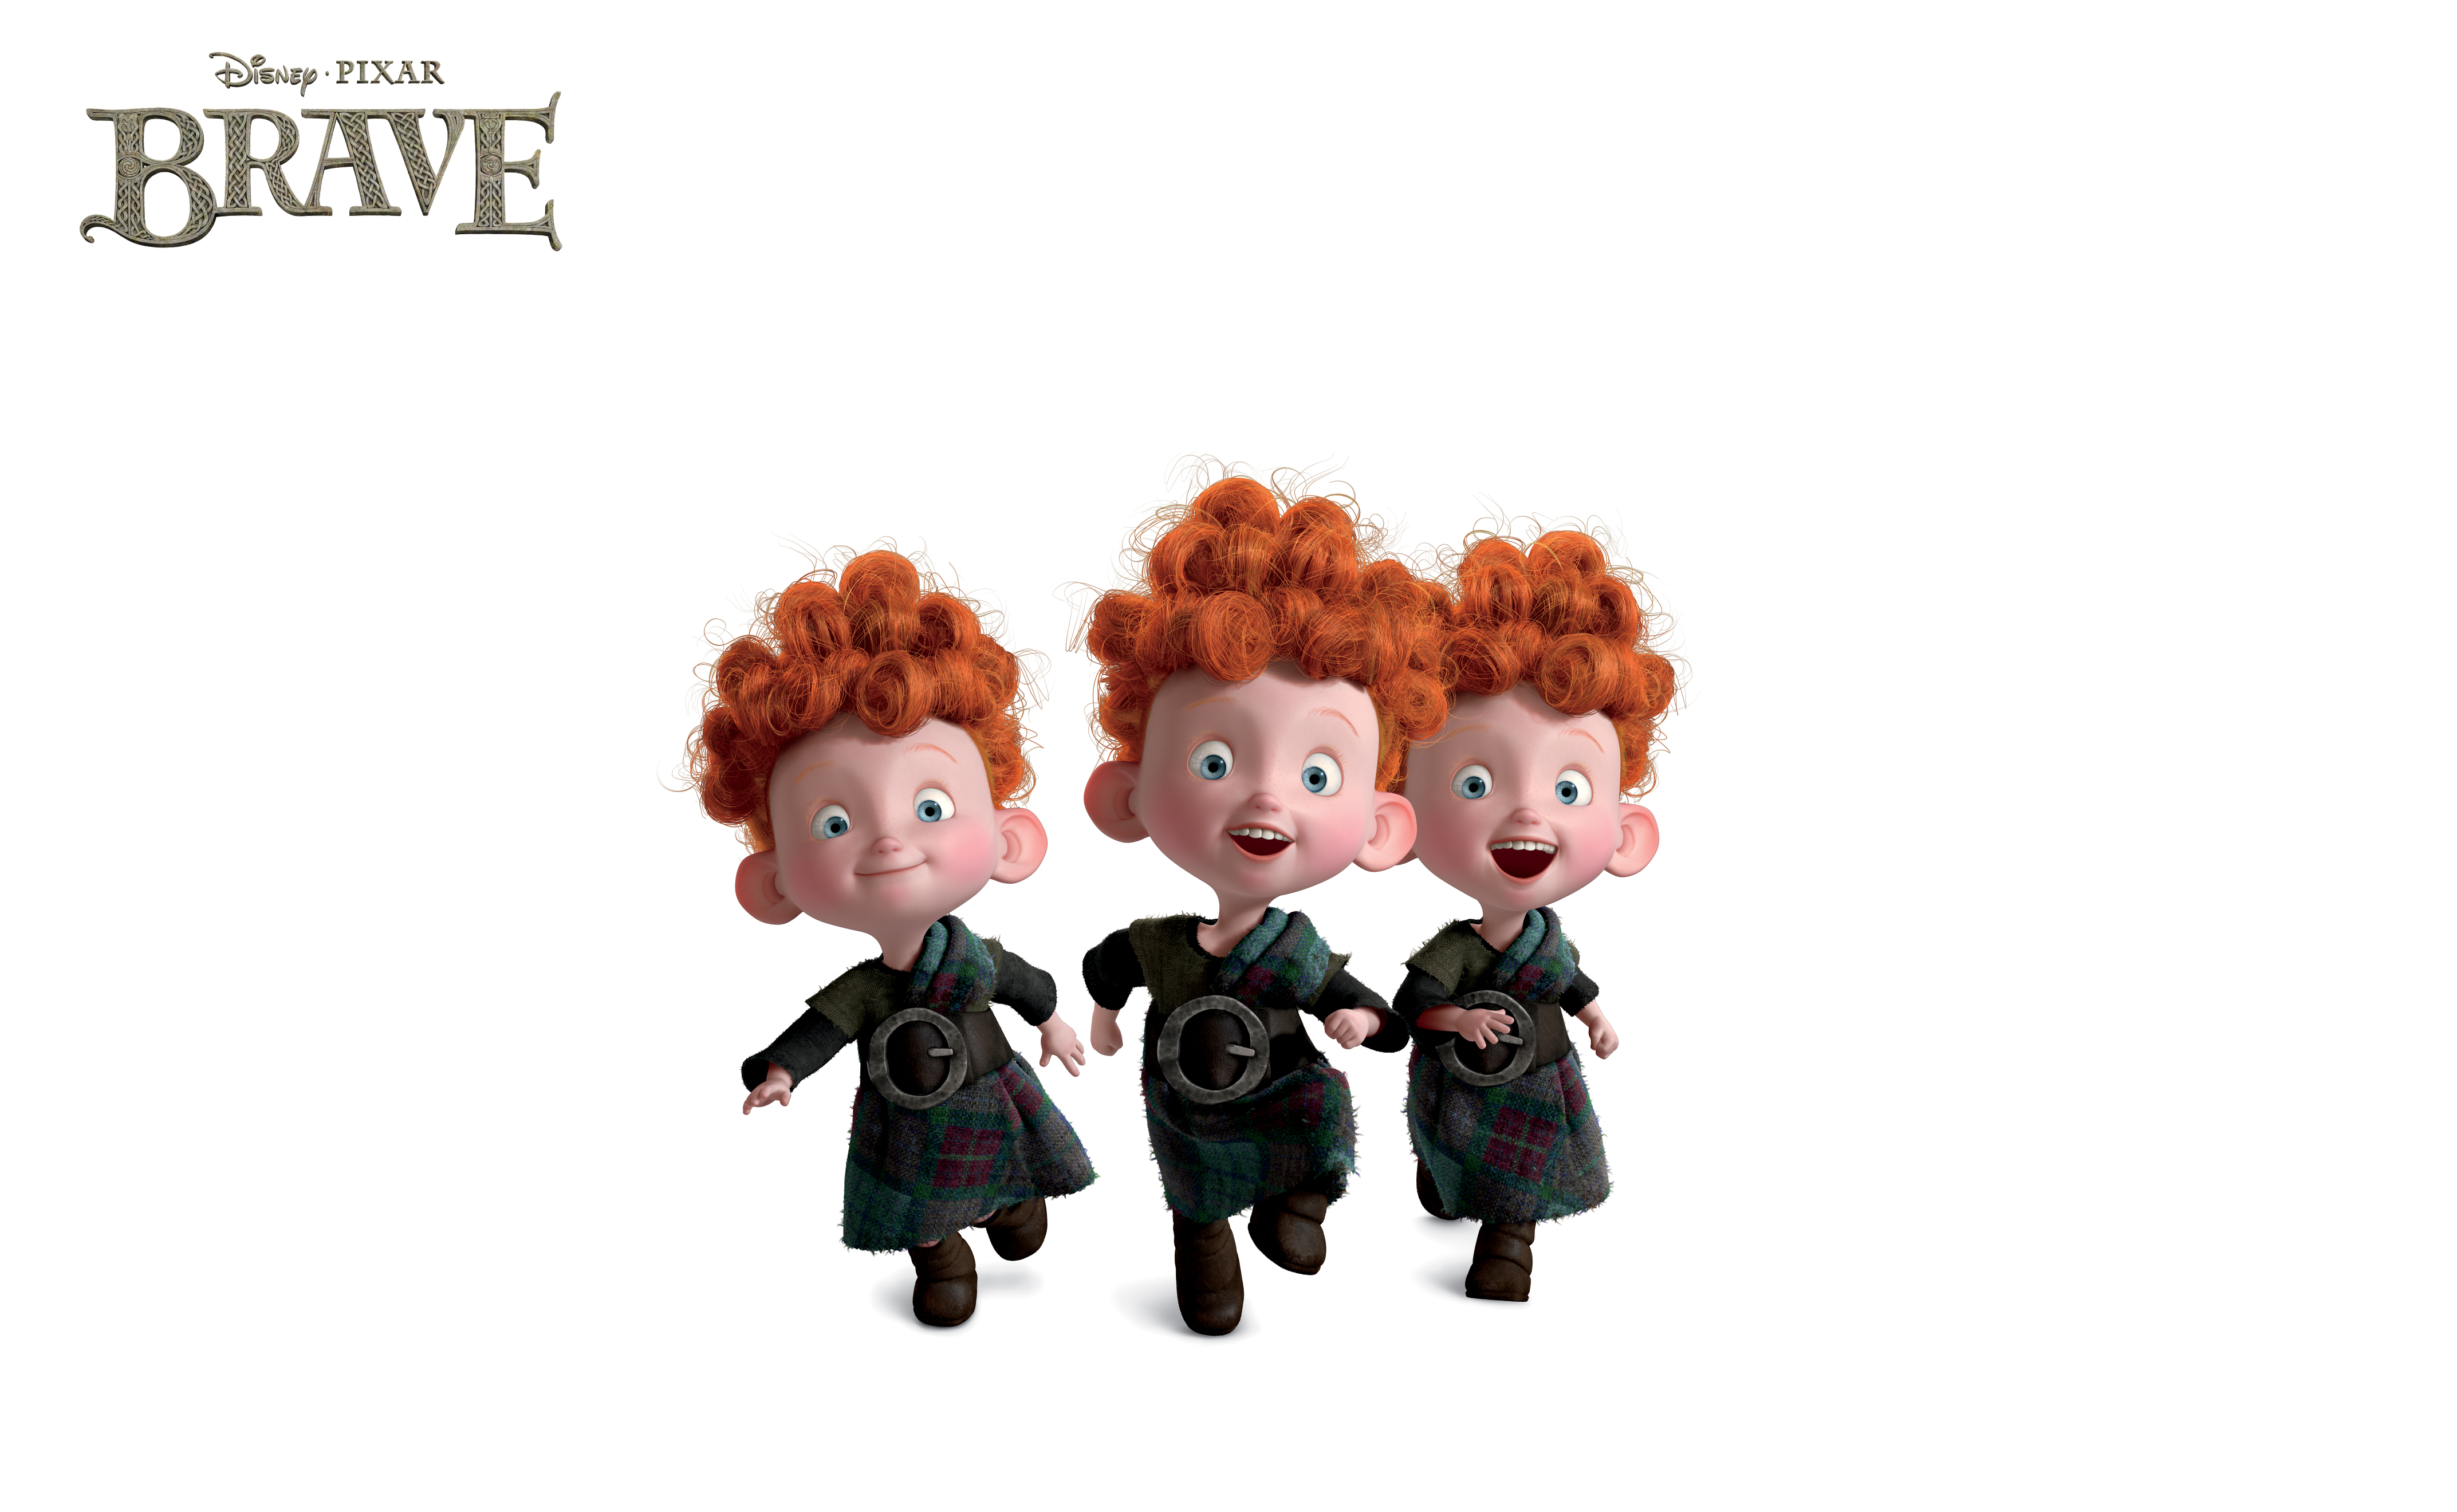 Brave (Movie) clipart #3, Download drawings